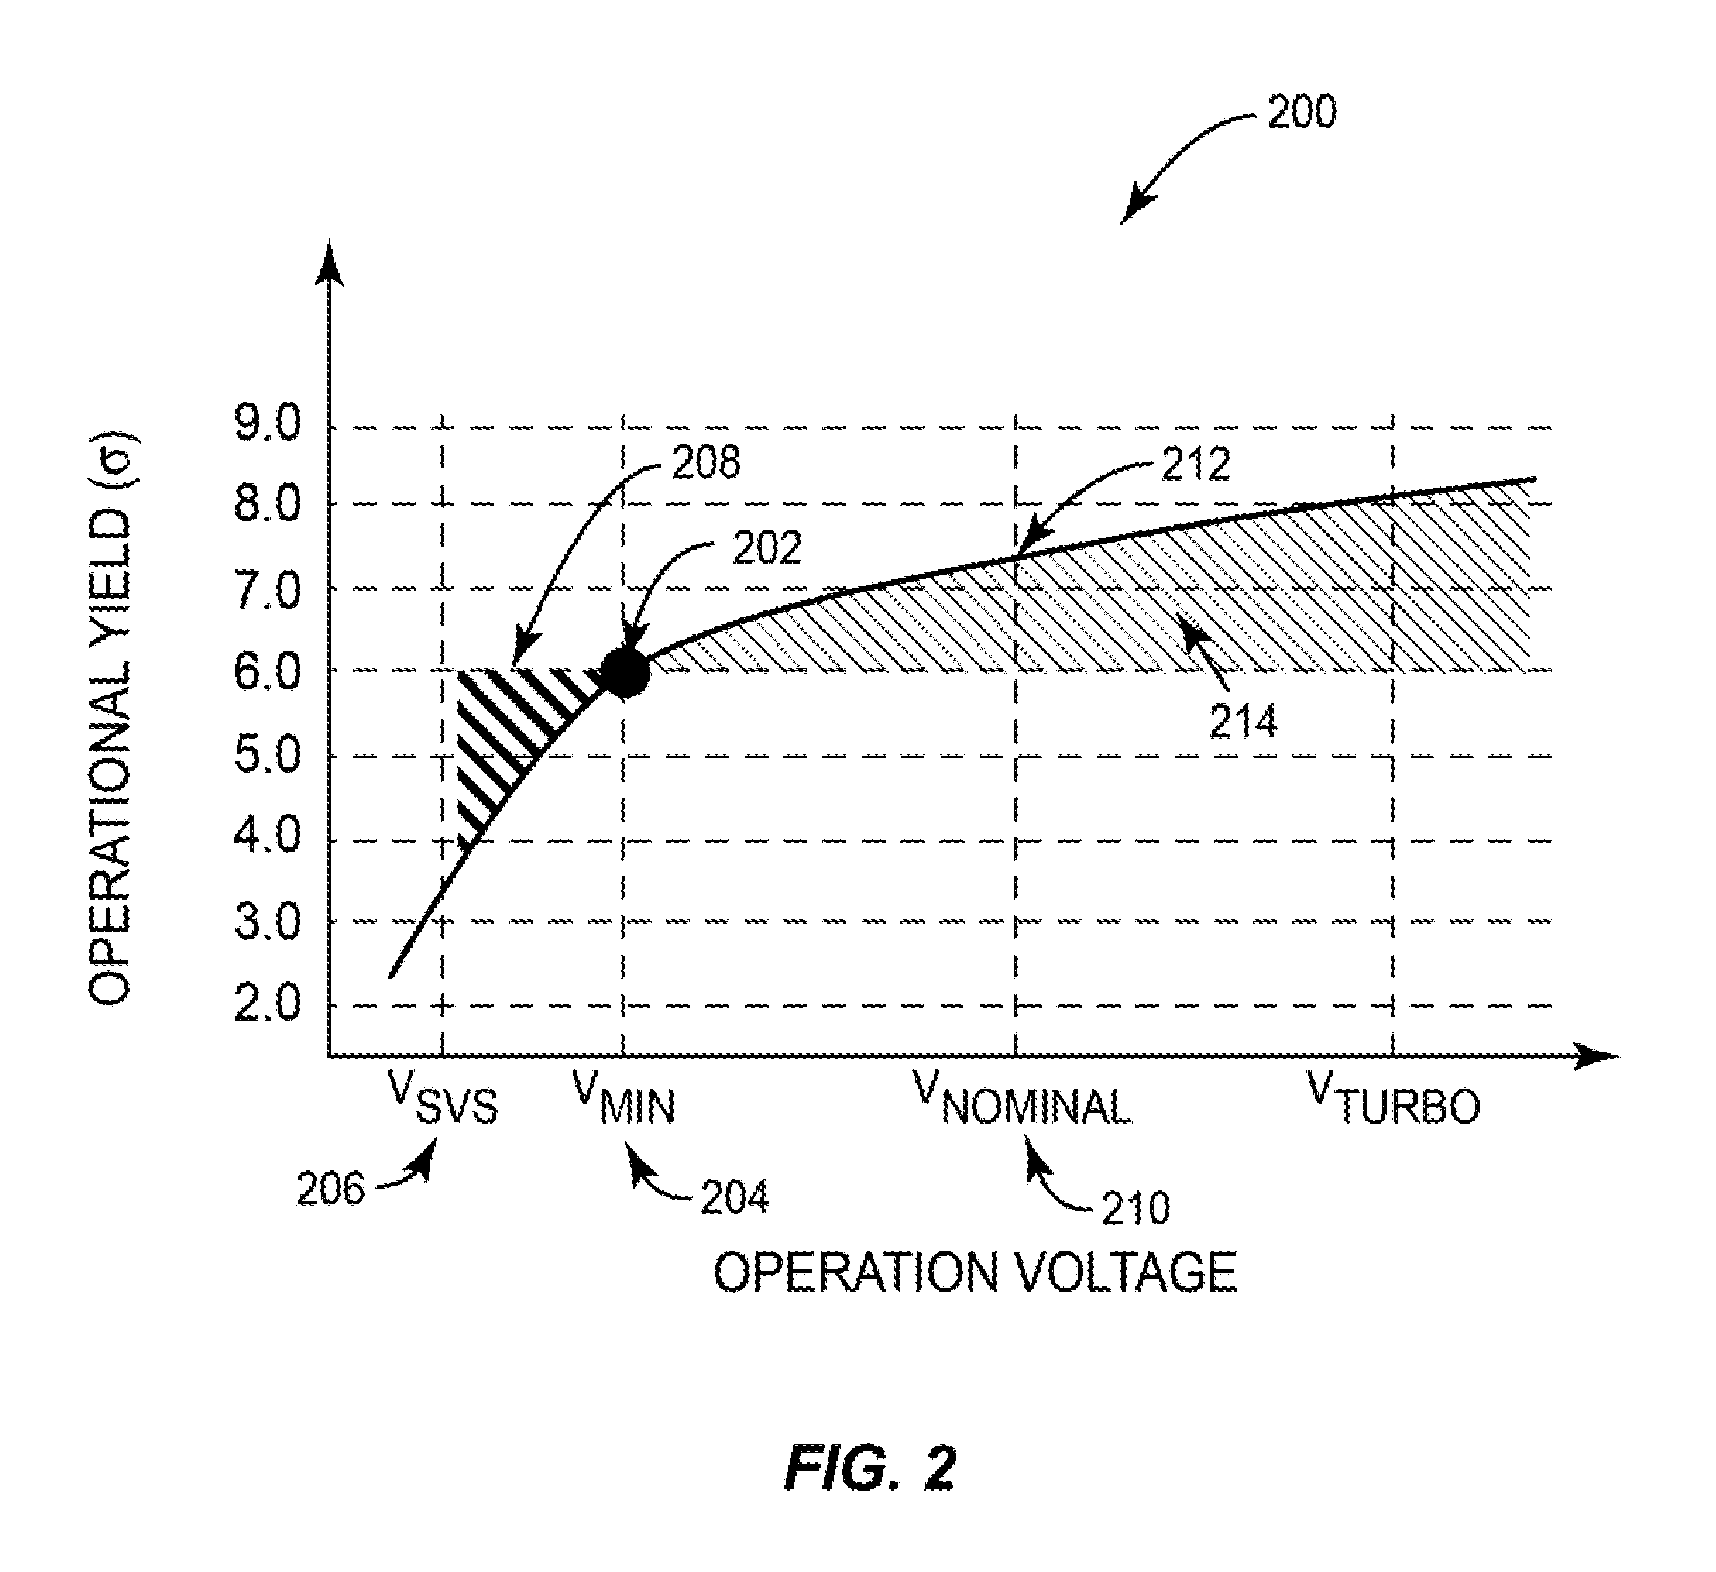 Static random access memory (SRAM) arrays having substantially constant operational yields across multiple modes of operation